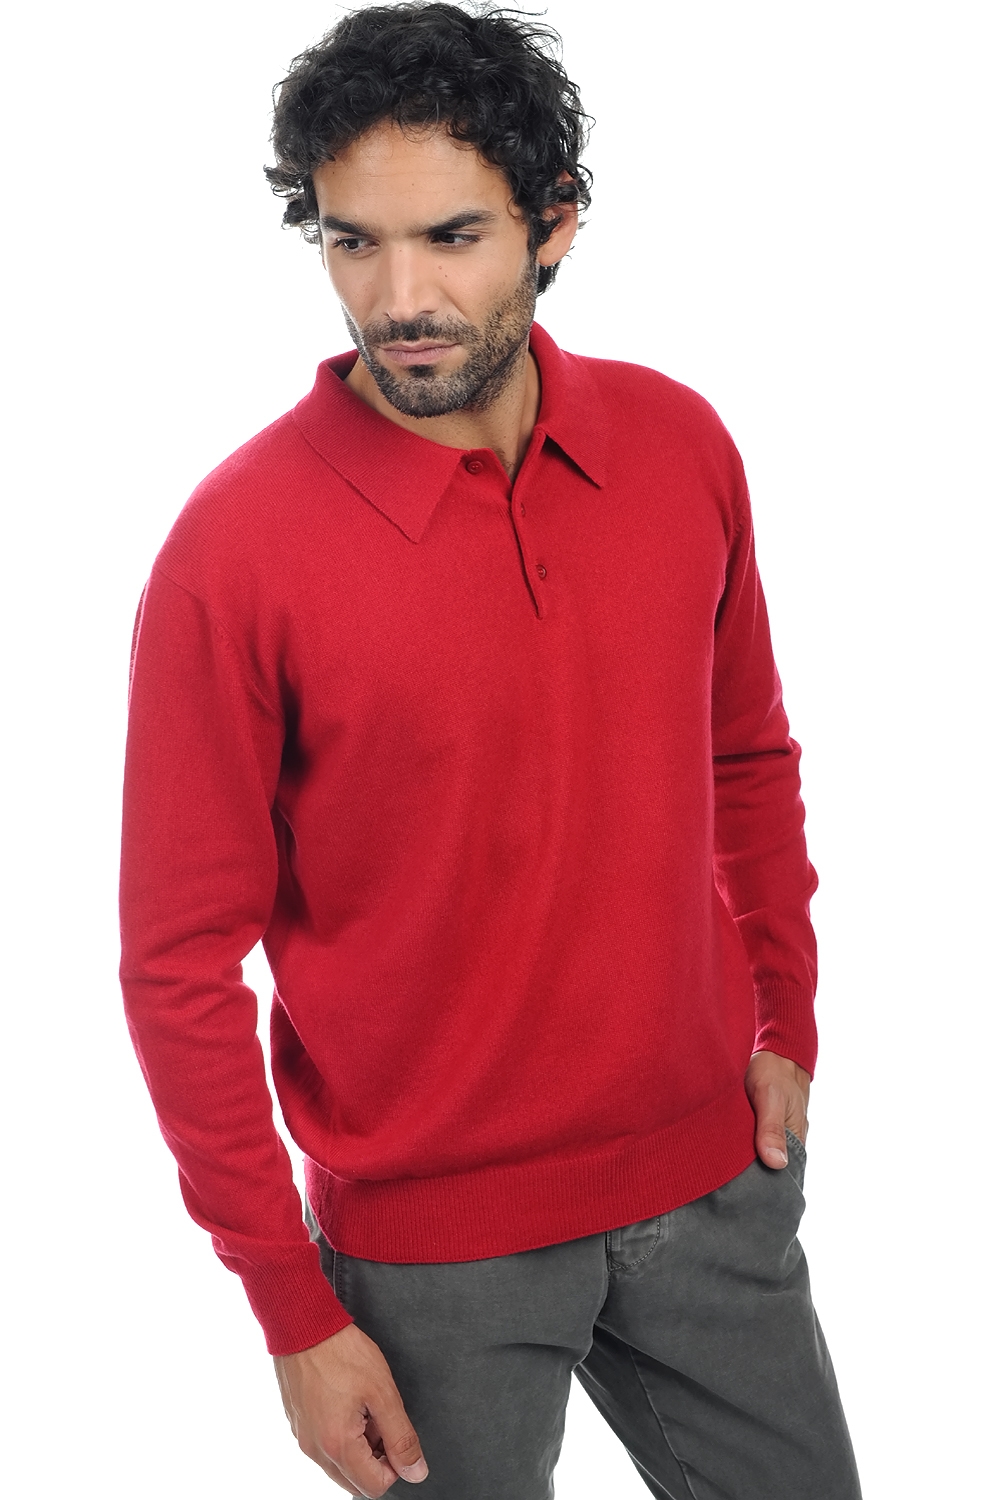 Cashmere men polo style sweaters alexandre blood red 3xl